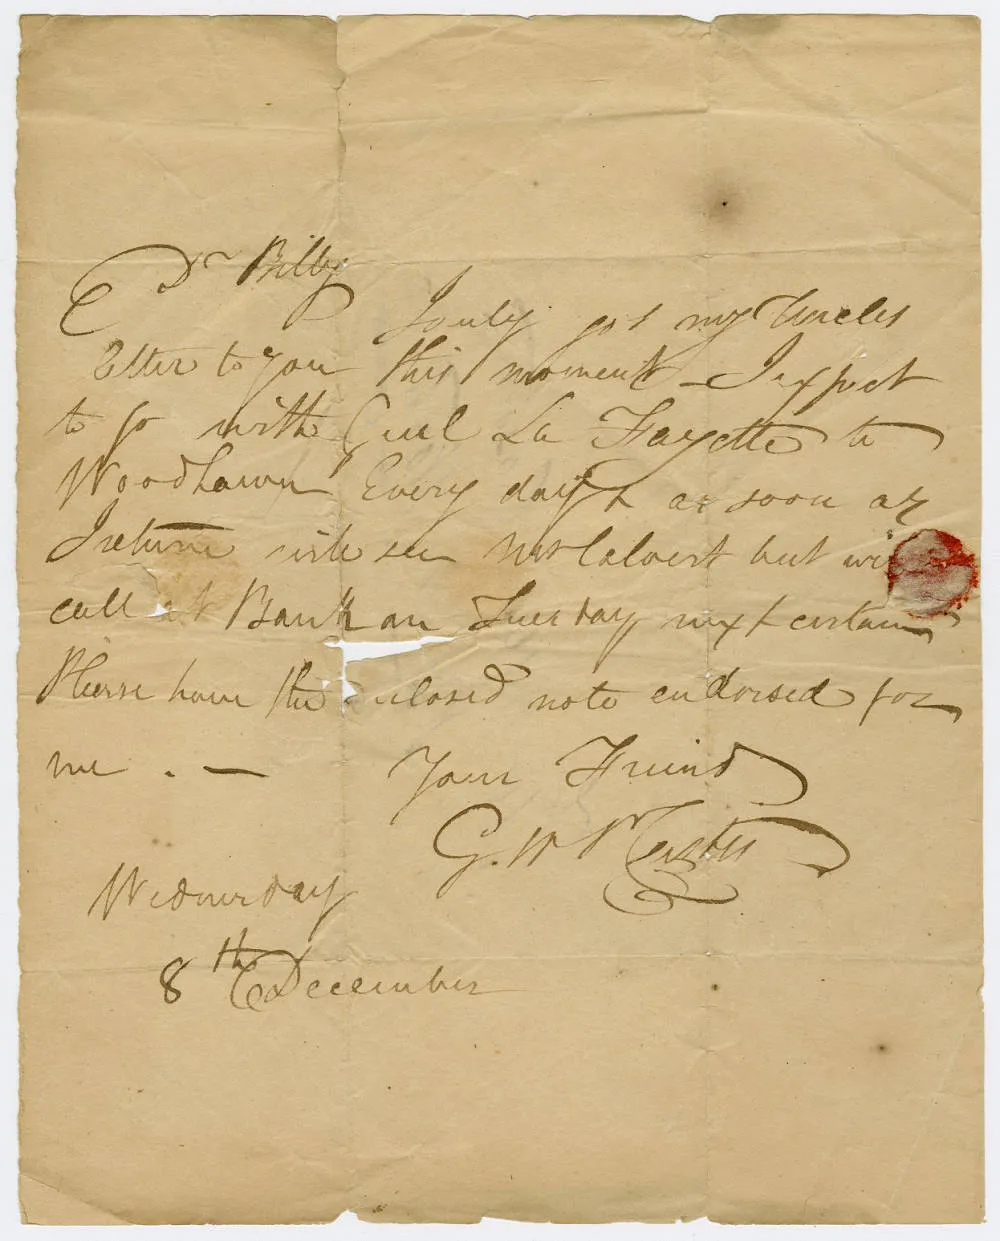 An 1824 letter from Wash to Costin